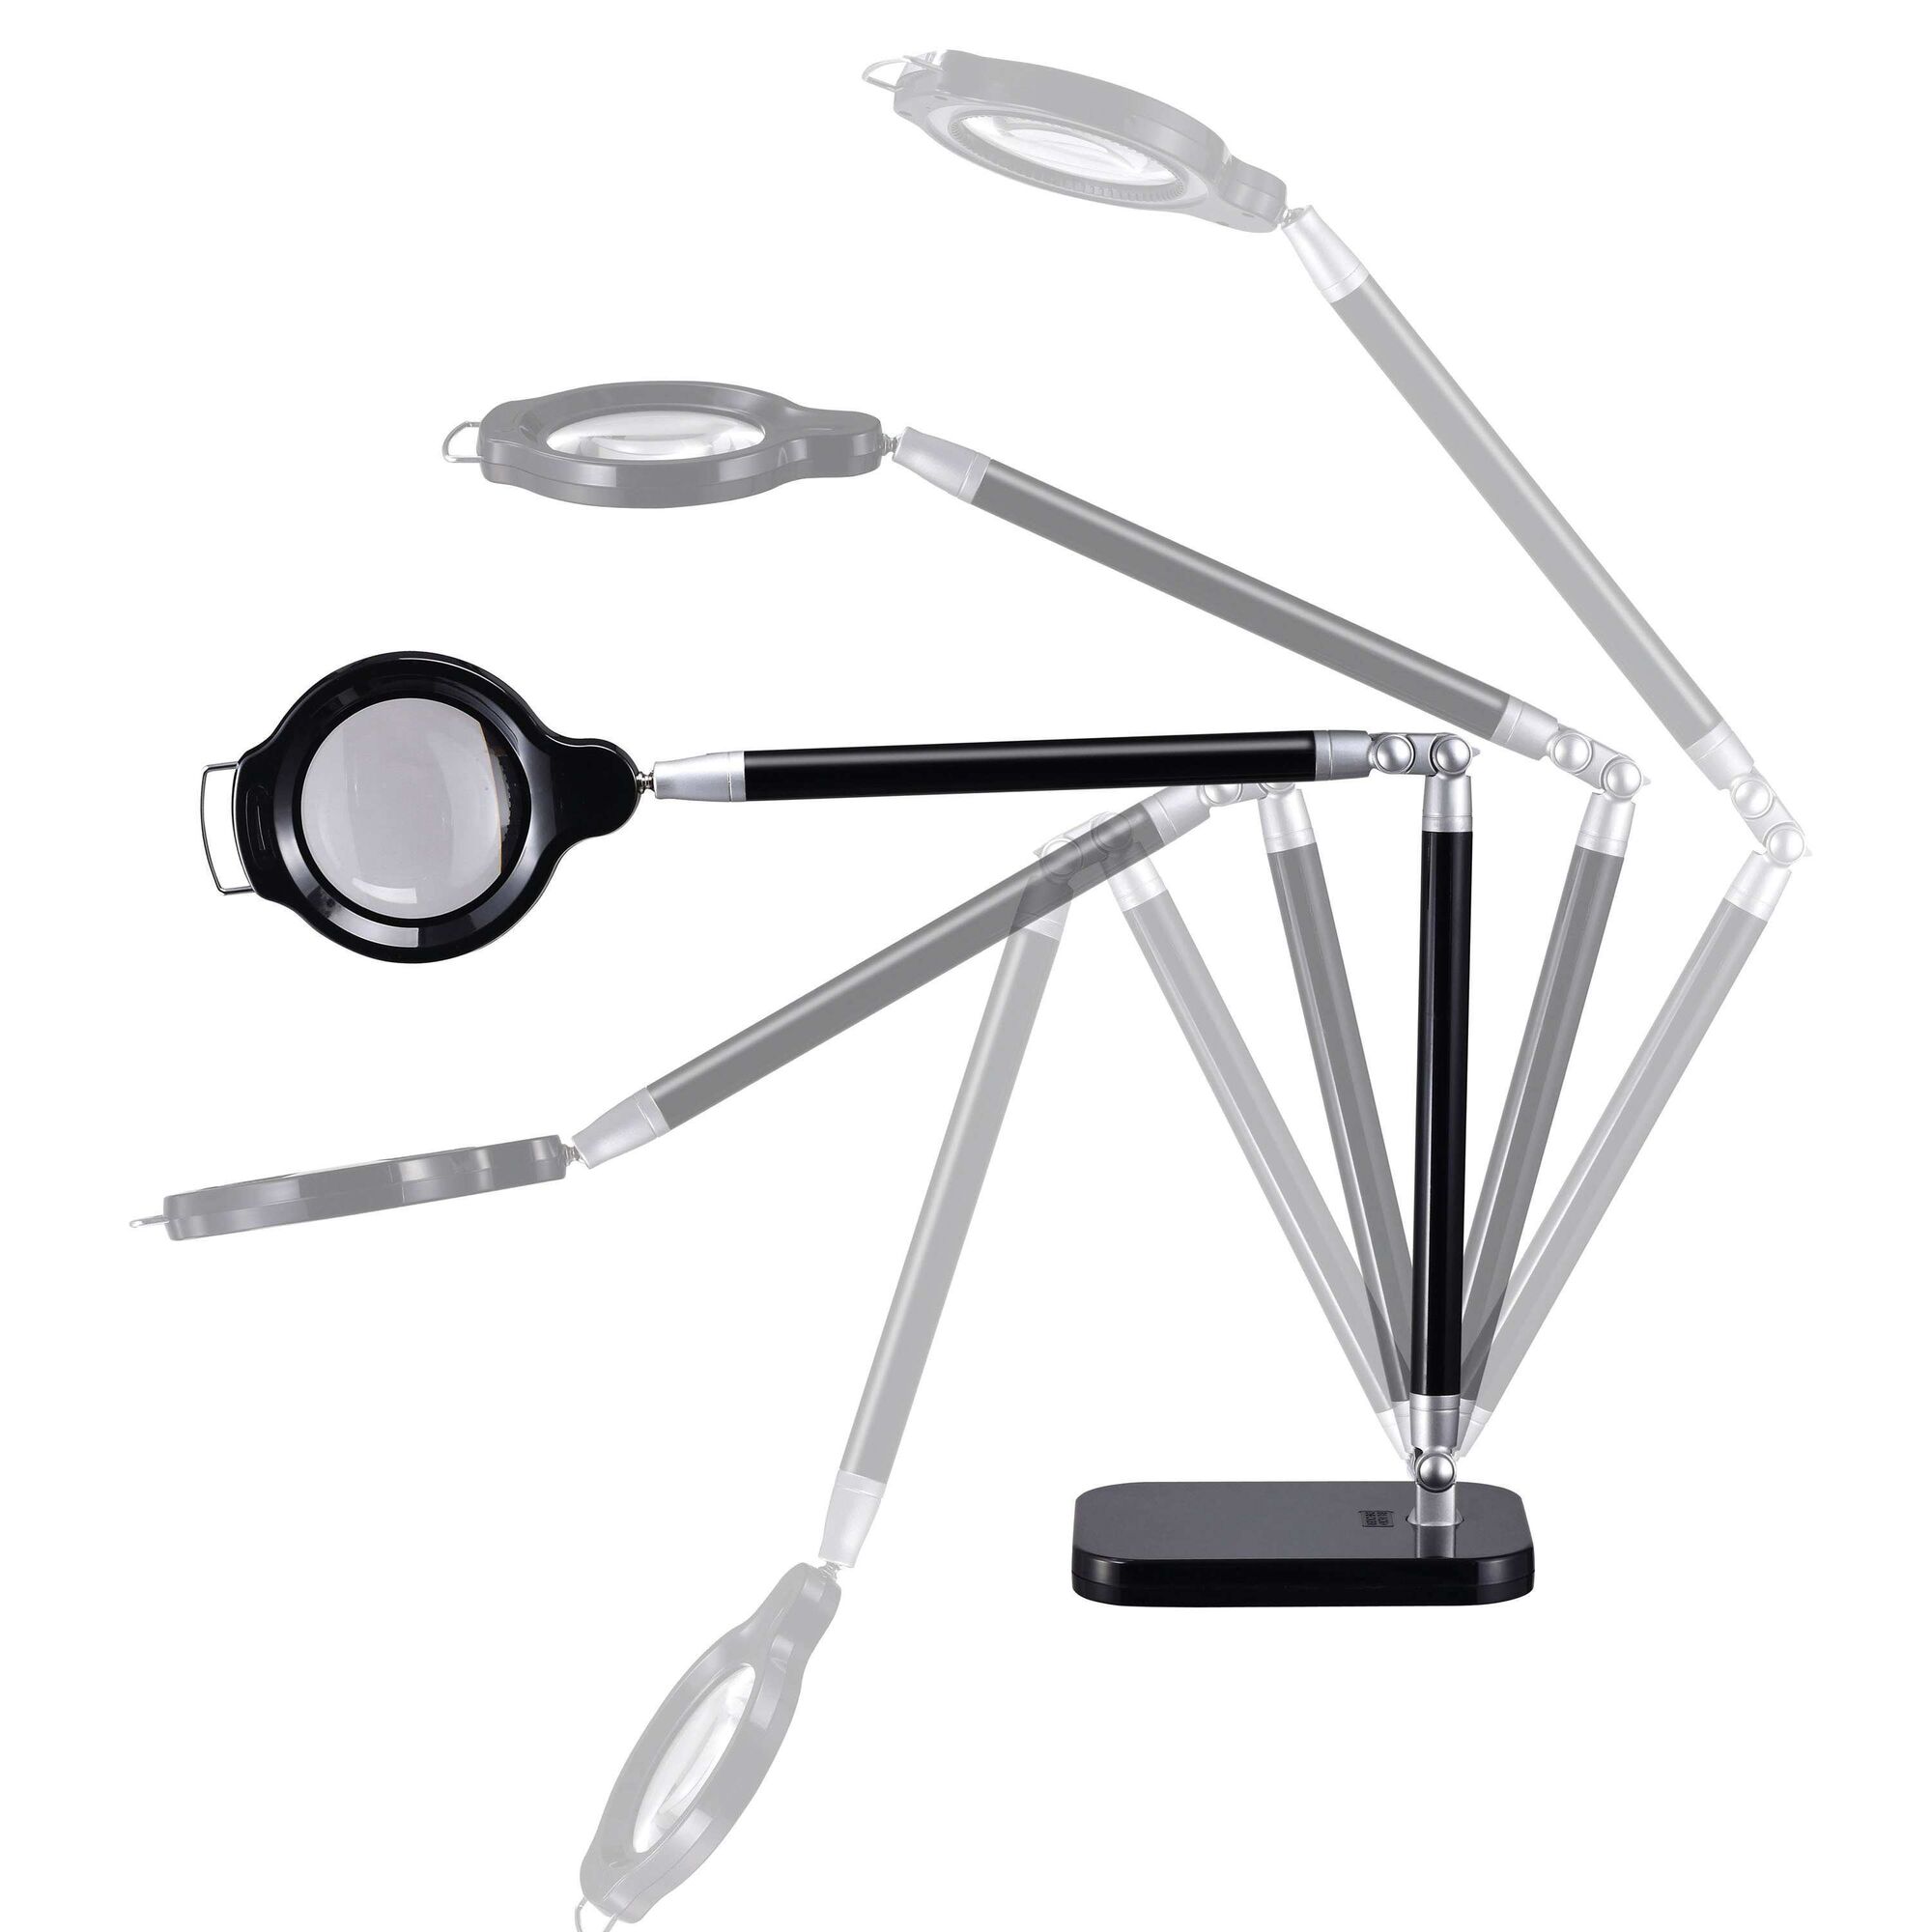 Adjustable lamp head and lamp arm to position light zone feature of Ultra Reach Magnifier L E D Desk Lamp.